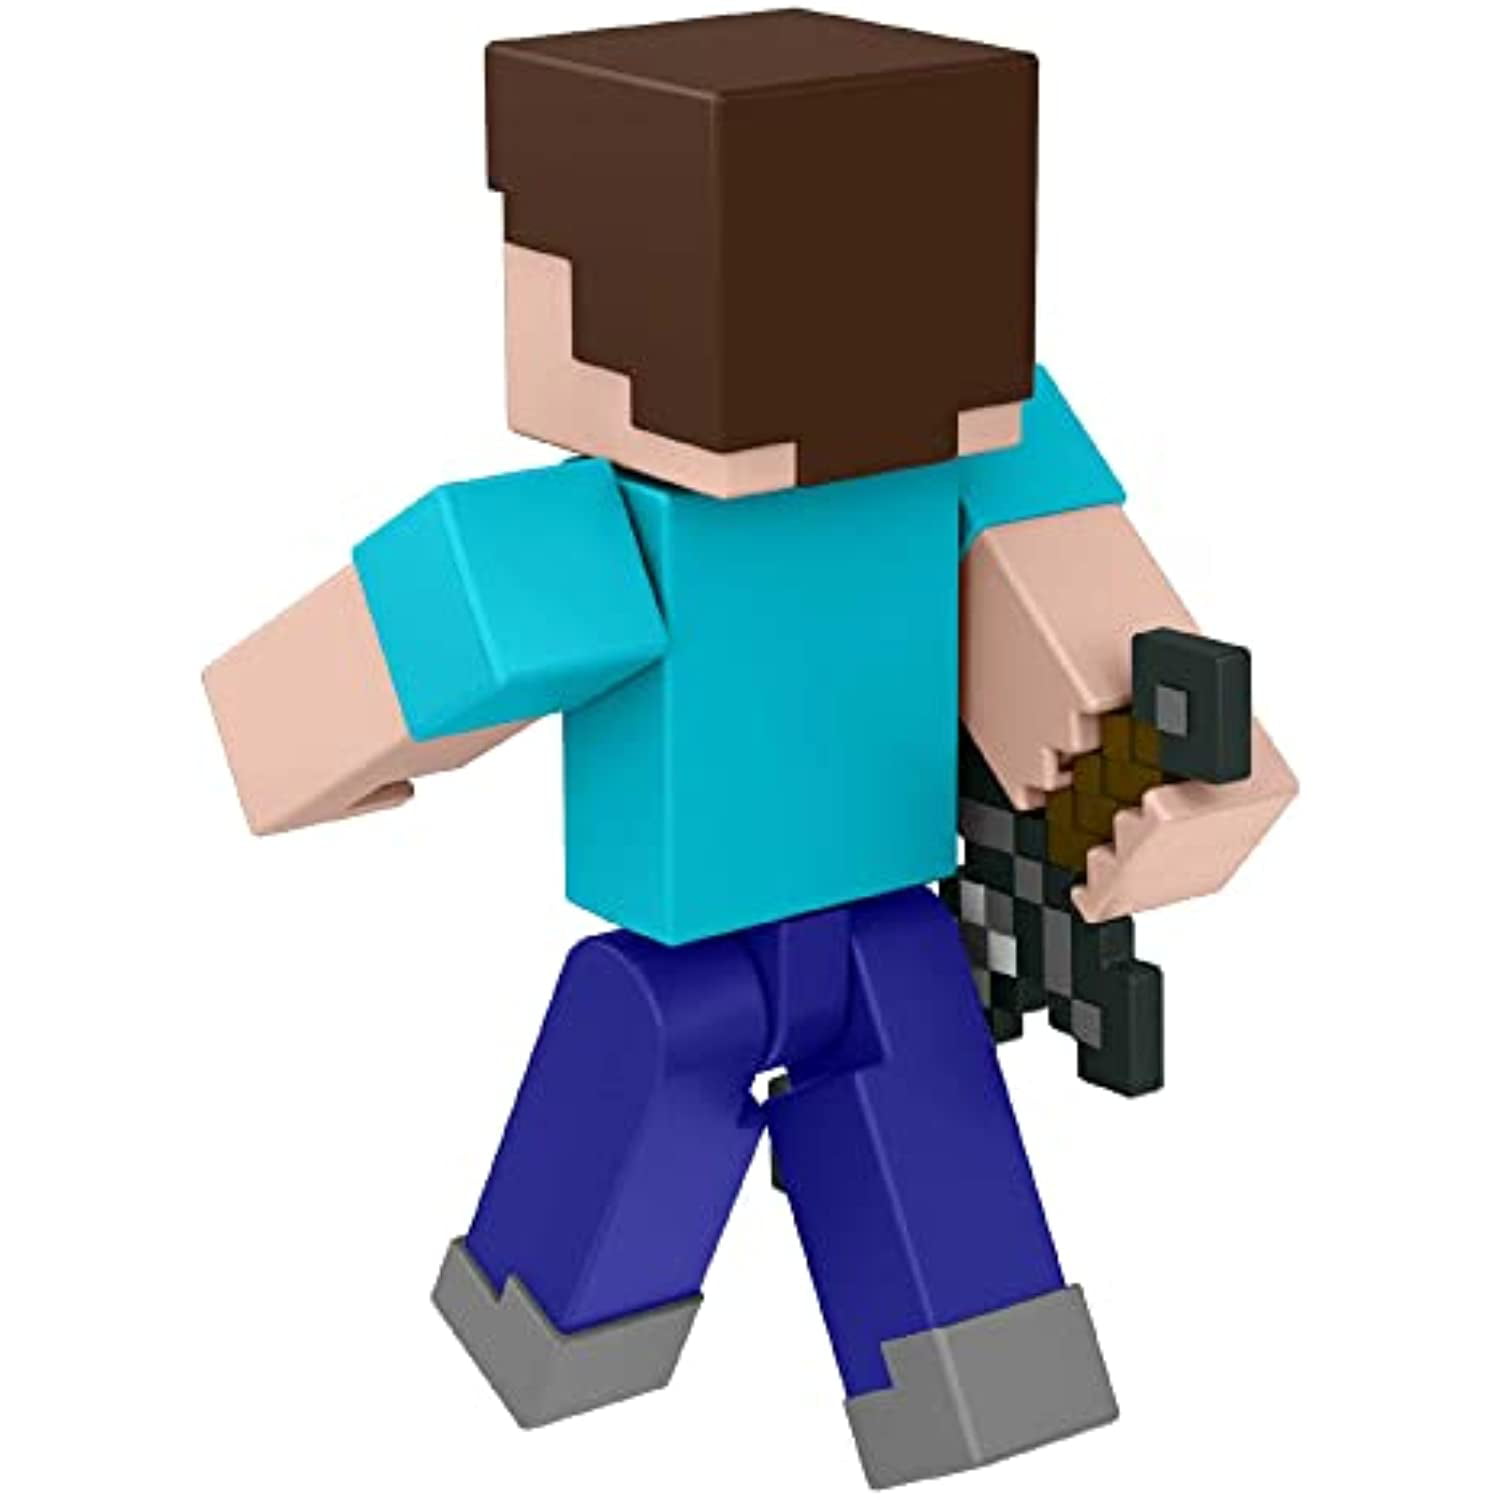 Minecraft Steve Action Figure, 3.25-in, with 1 Build-a-Portal Piece & 1  Accessory, Building Toy Inspired by Video Game, Collectible Gift for Fans 